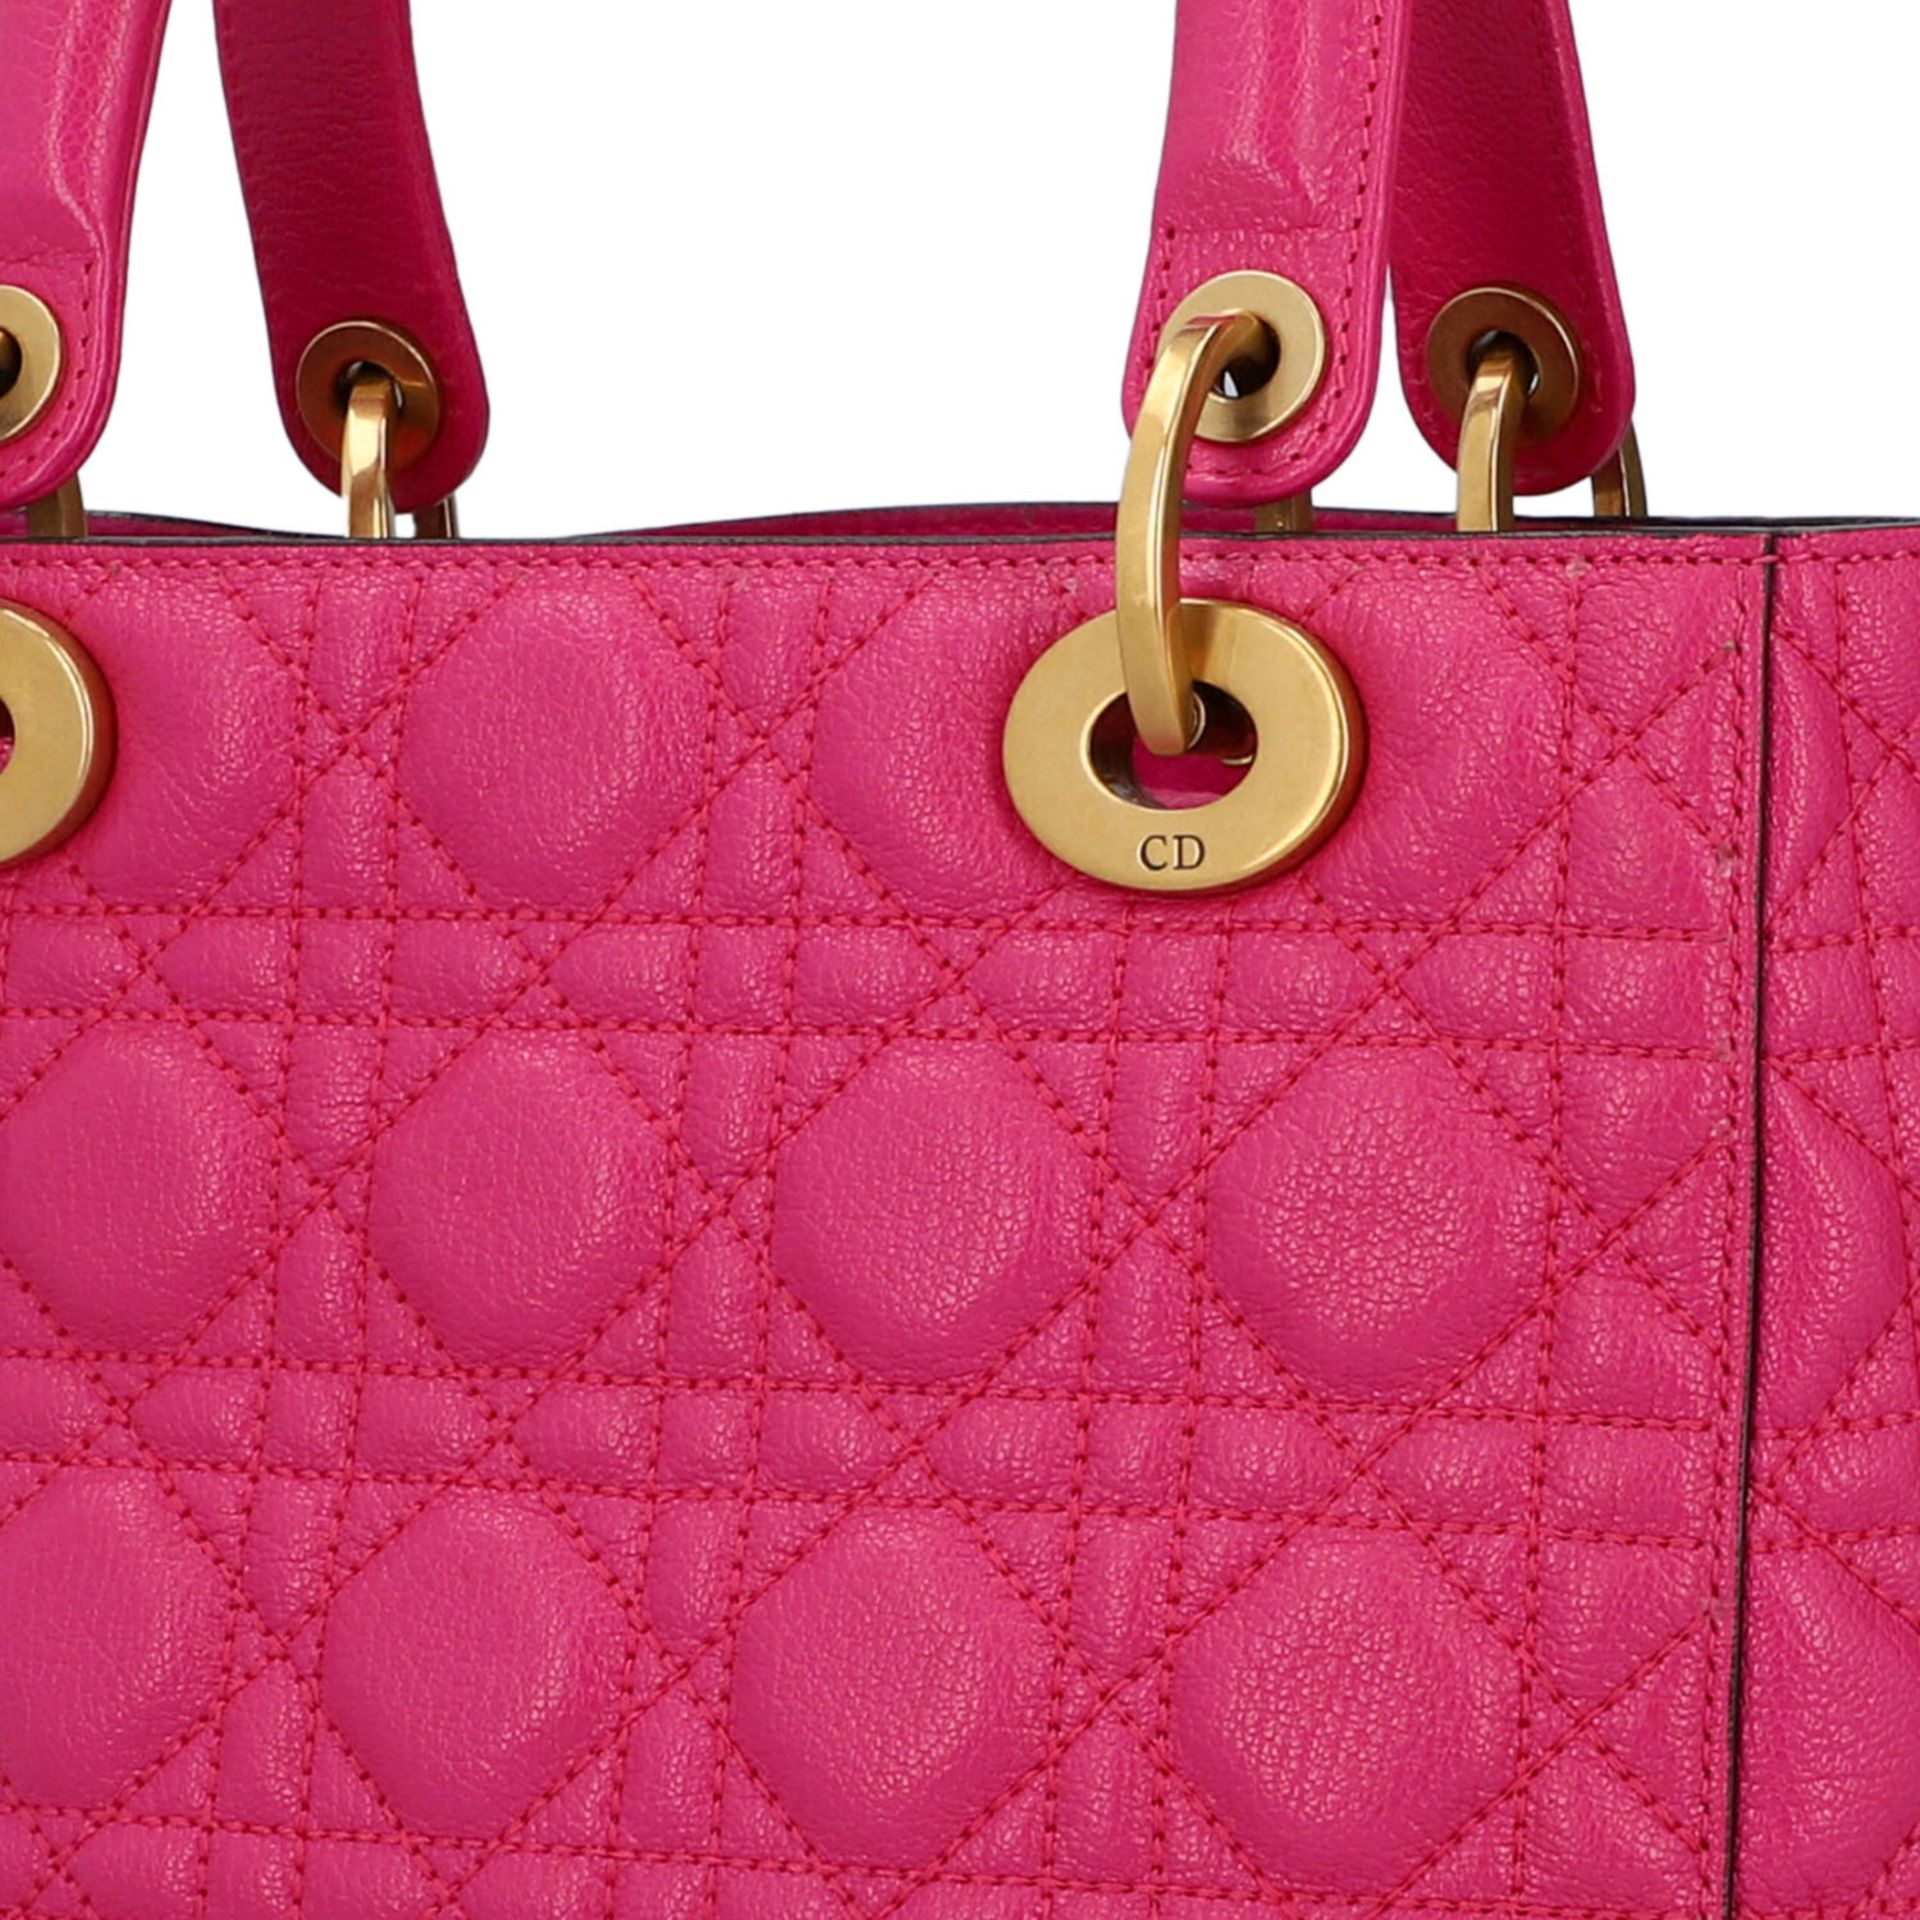 CHRISTIAN DIOR Handtasche "LADY DIOR", Koll. 2018.Limited Edition in Fuchsia. NP. ca.: - Image 7 of 8